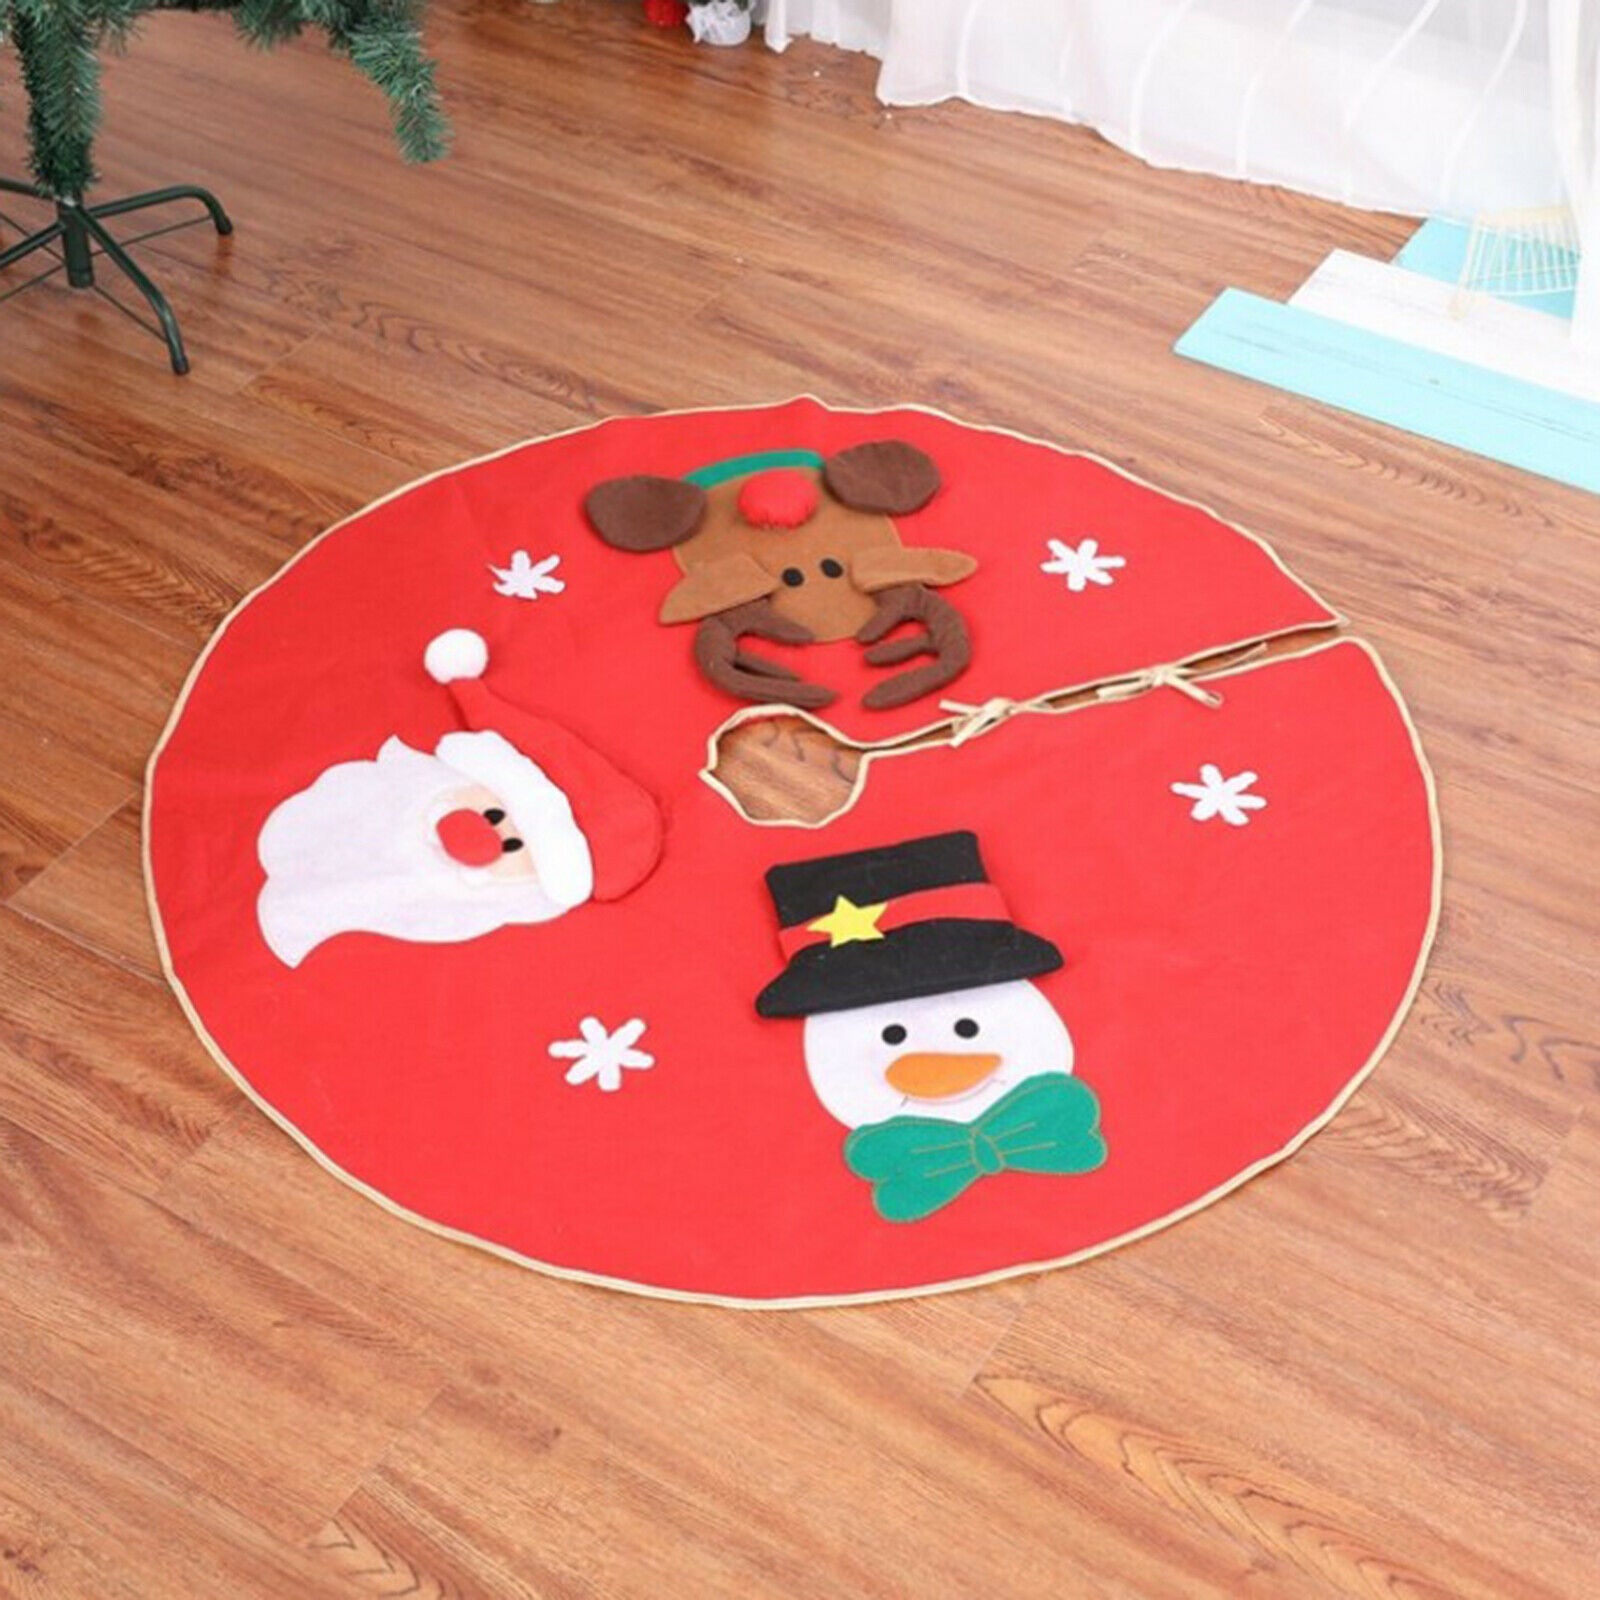 Tree Skirt Round Cover 100cm Christmas Tree Skirt for Home Decorations